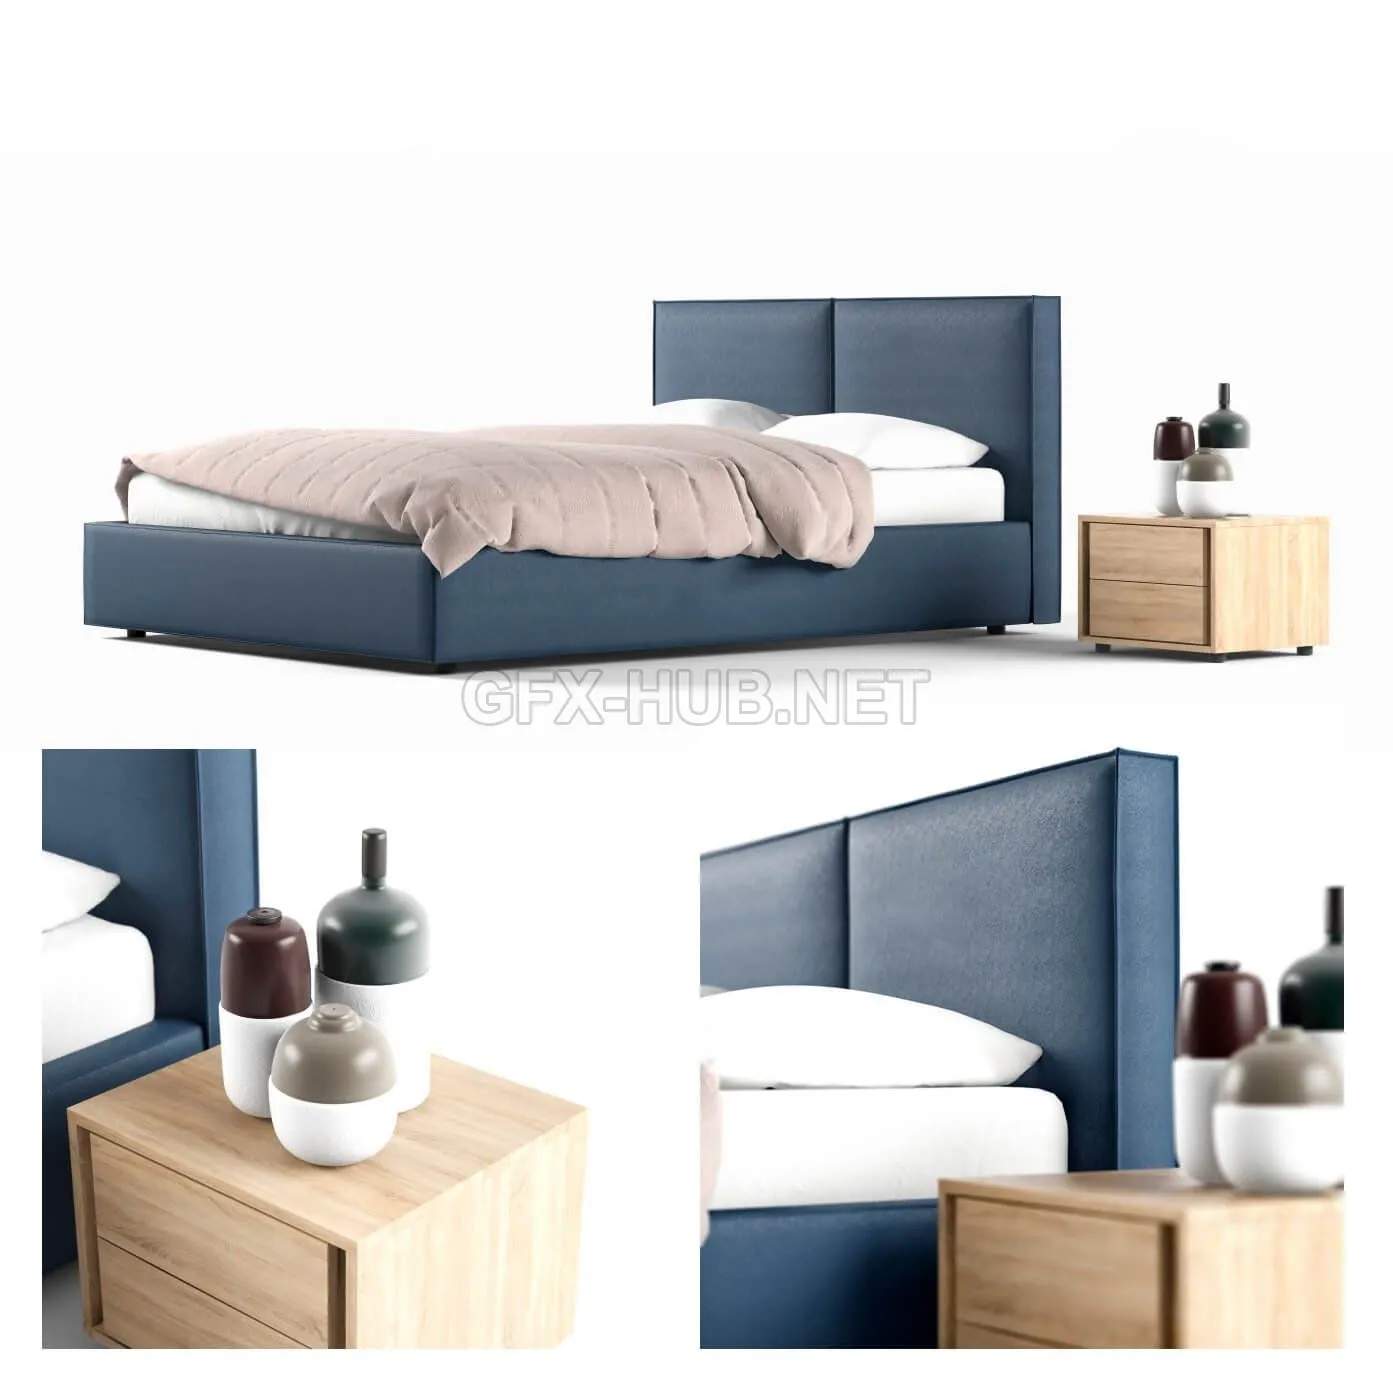 Bed 048 – 207573